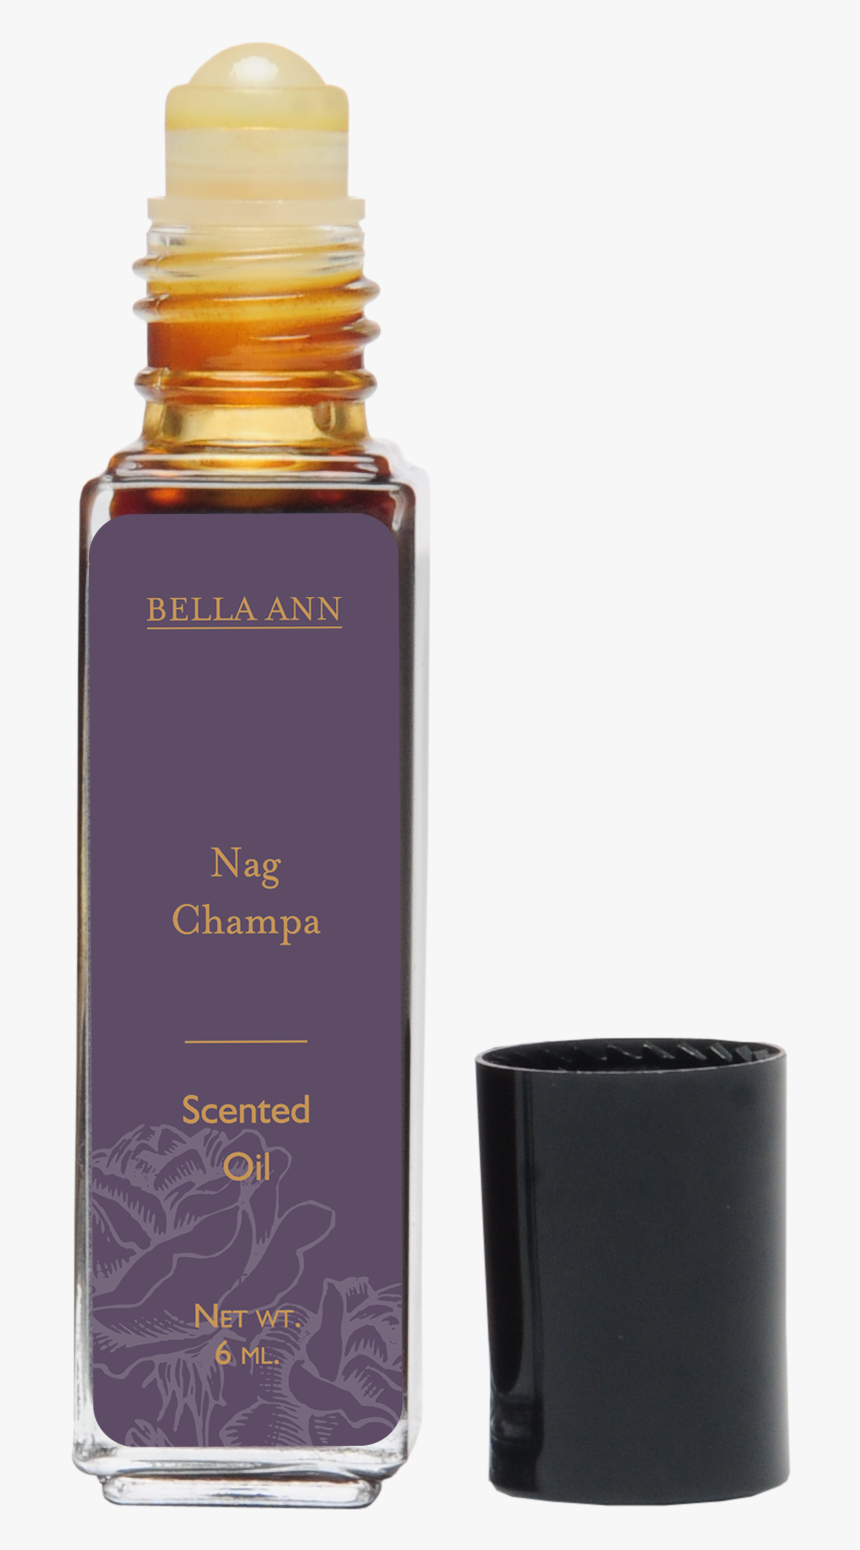 Roll On Bottle Of Body Oil In Nag Champa Scent - Cosmetics, HD Png Download, Free Download